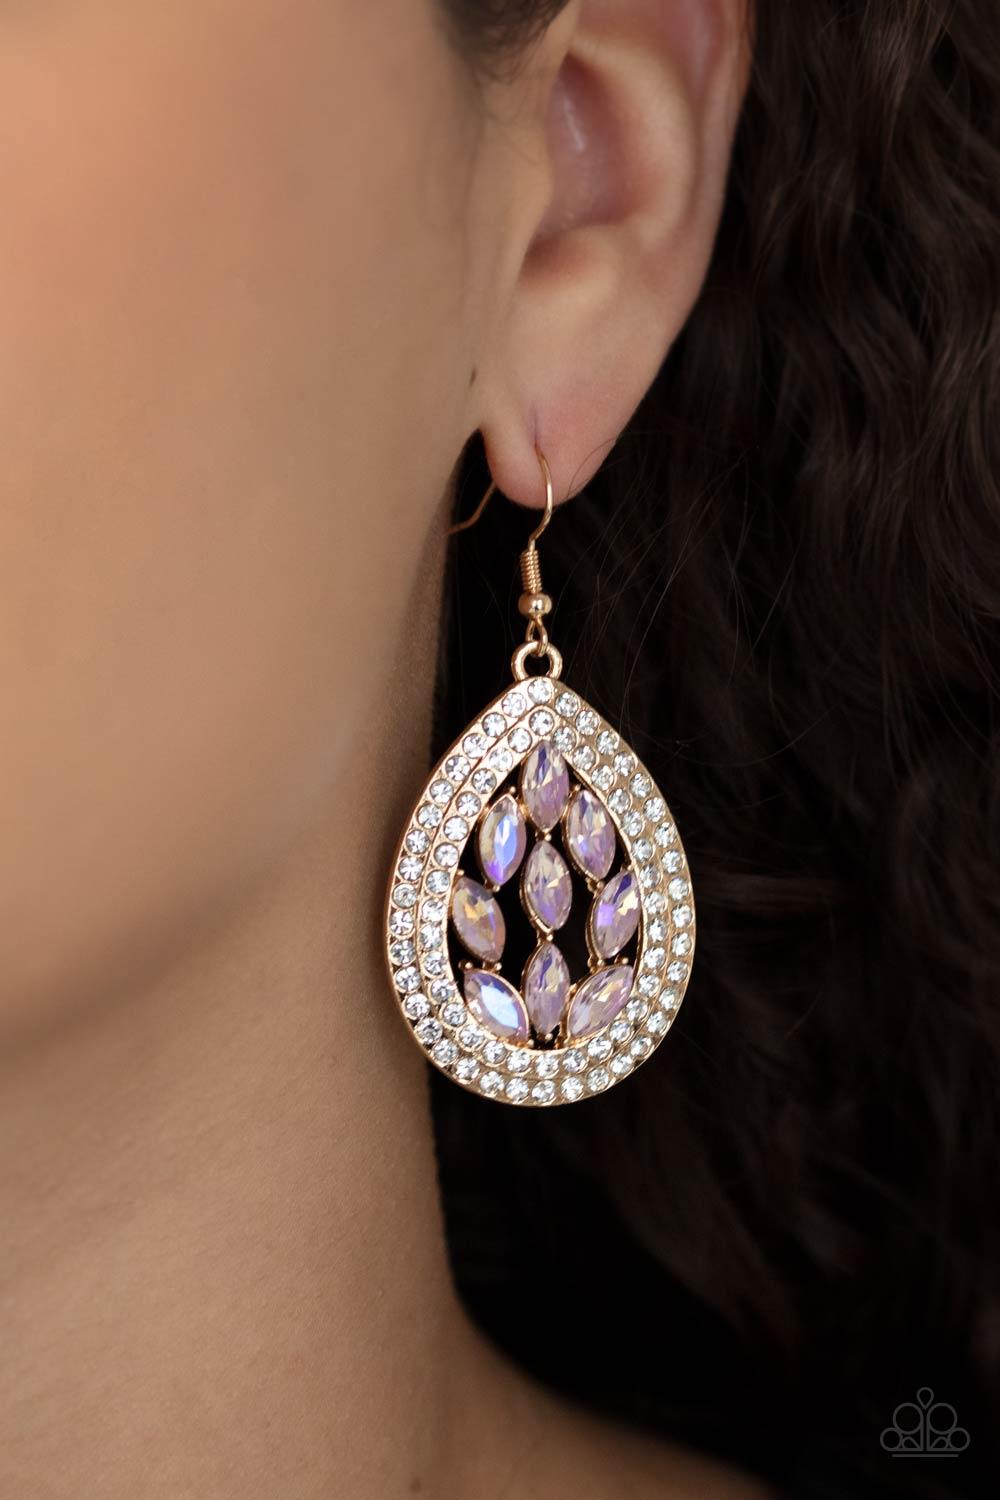 Paparazzi Accessories Encased in Elegance - Gold Iridescent marquise cut rhinestones collect inside two borders of glassy white rhinestones, coalescing into a sparkly teardrop. Earring attaches to a standard fishhook fitting. Sparkly and Bright these eye